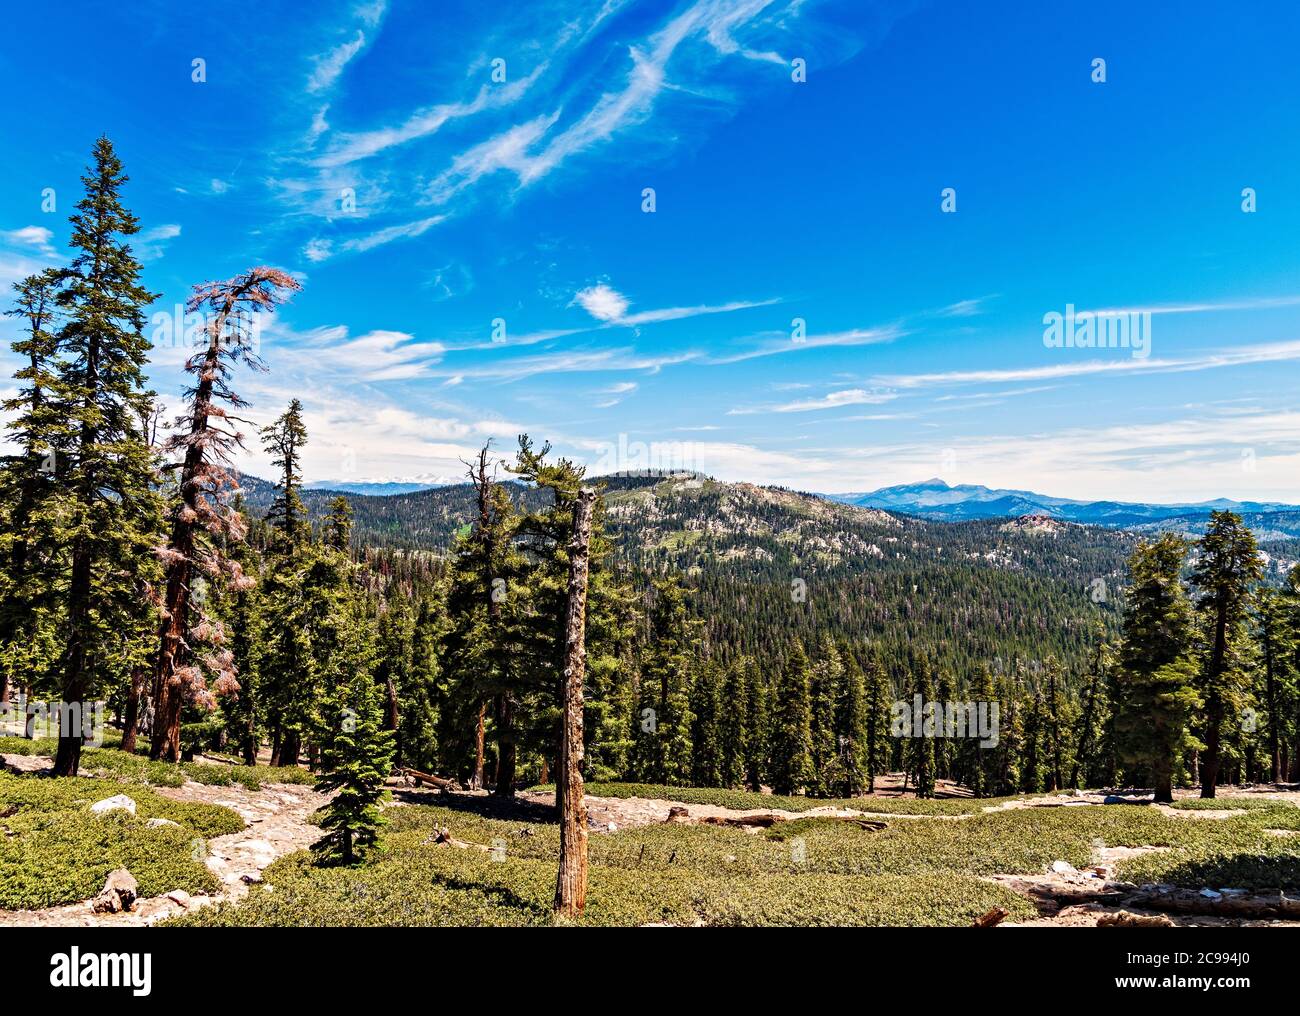 Mountain meadow with tall pine trees and mountains beyond under blue slue sky with white clouds. Stock Photo